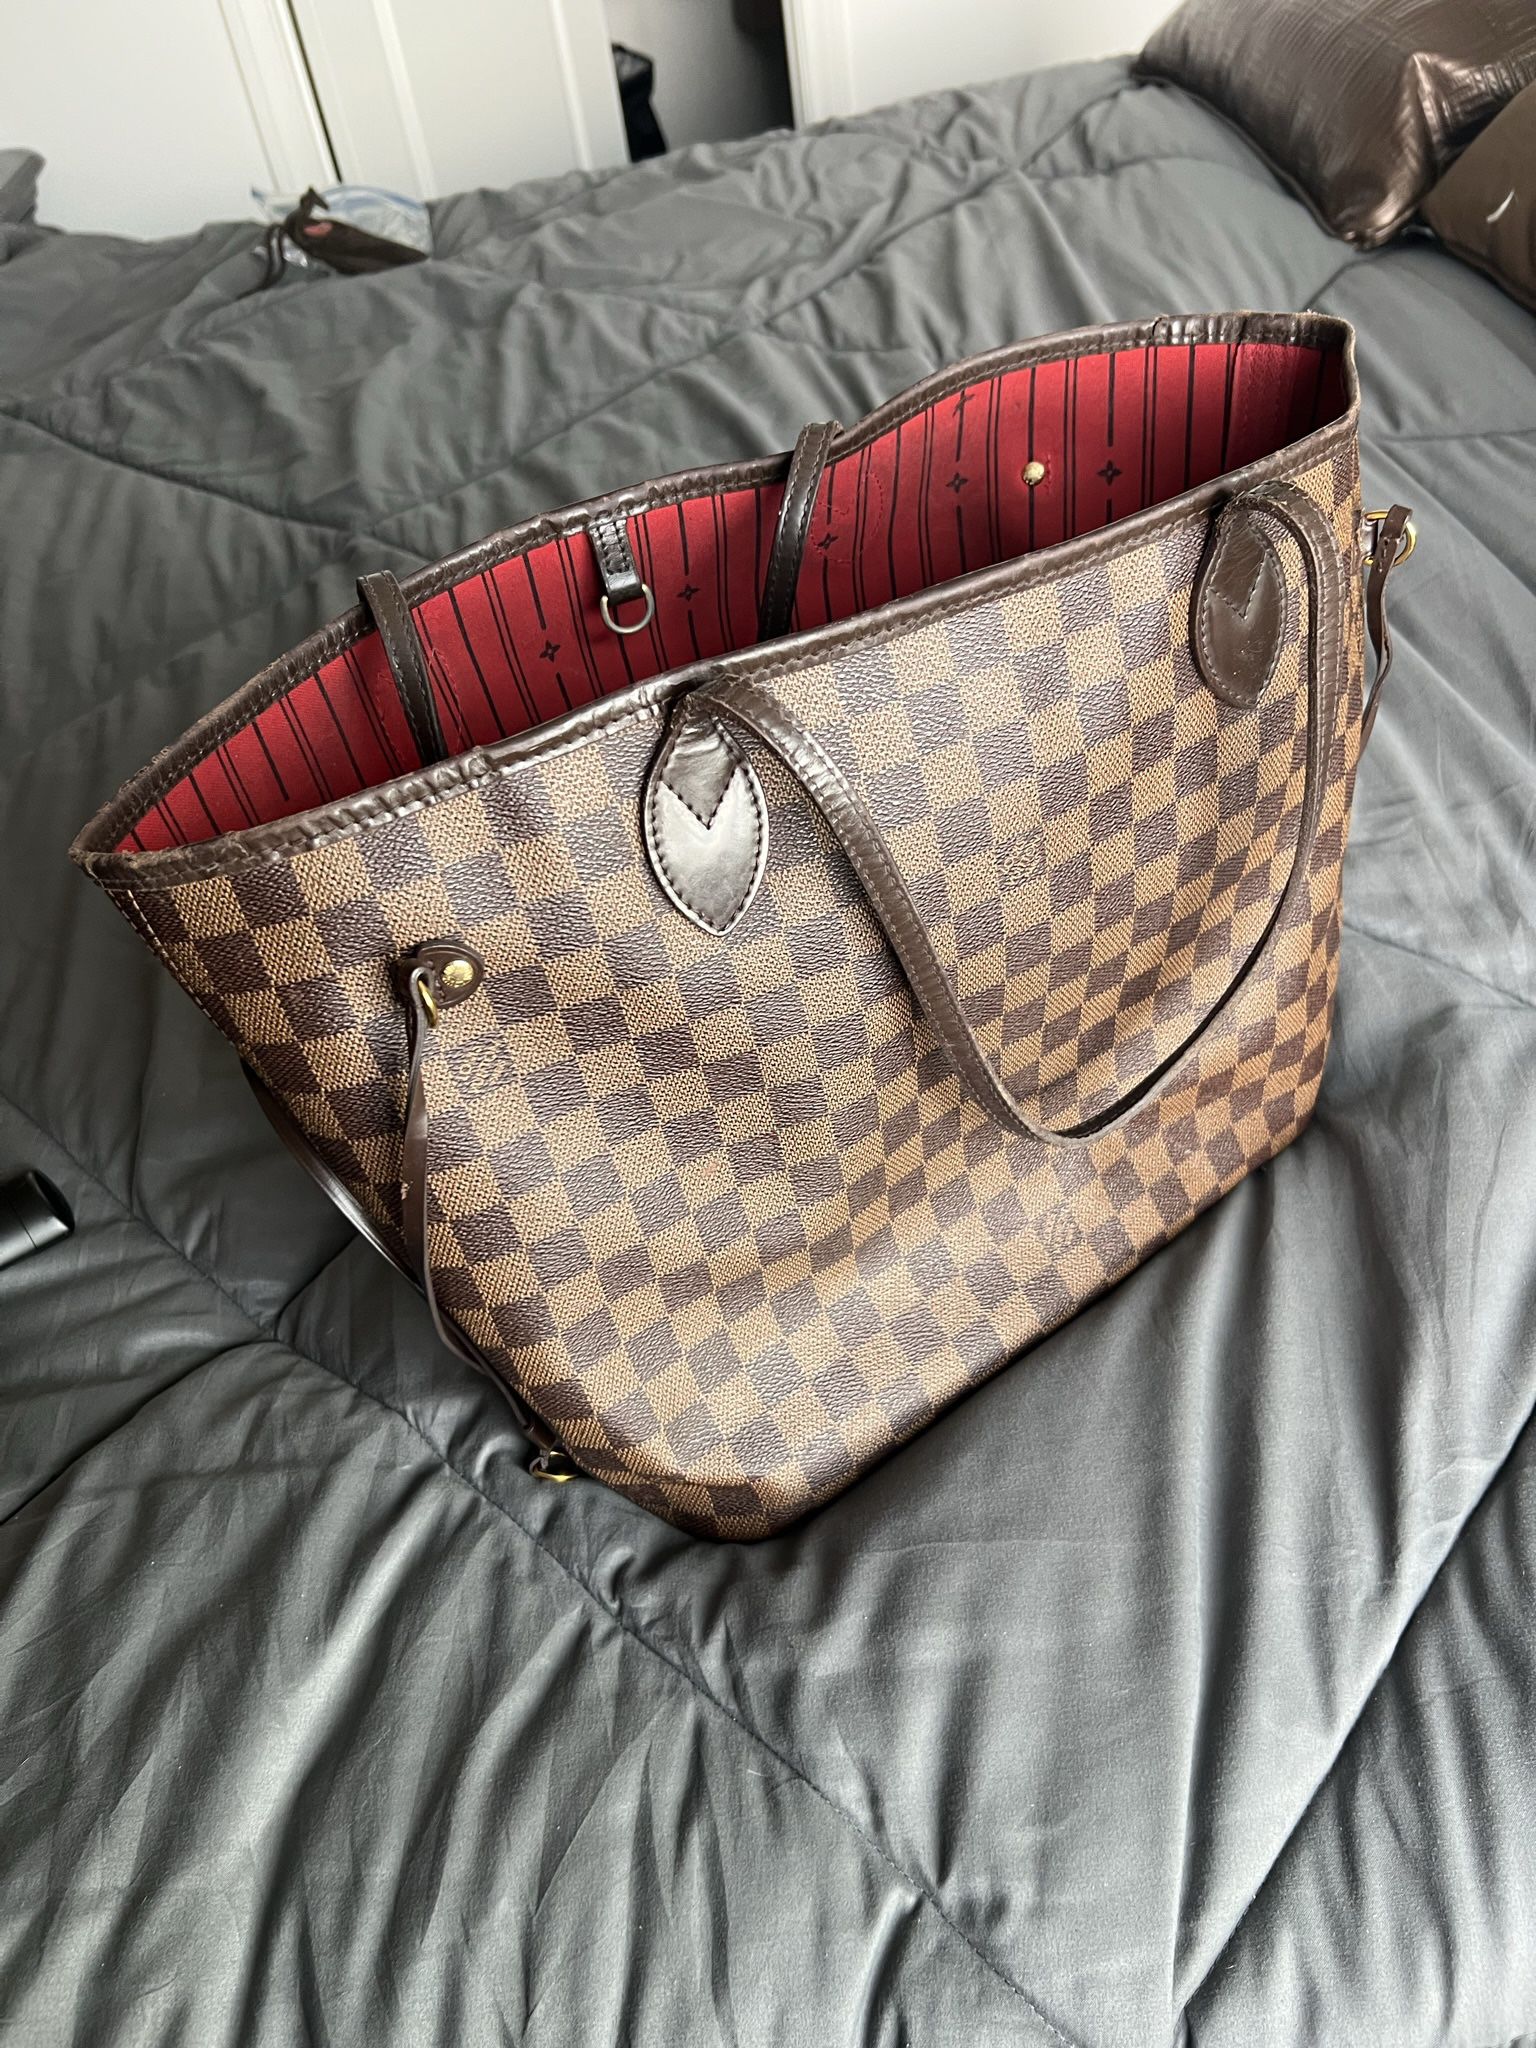 Louis Vuitton LV Los Angeles City Guide Book Like New No Sign Of Wear for  Sale in Chino, CA - OfferUp